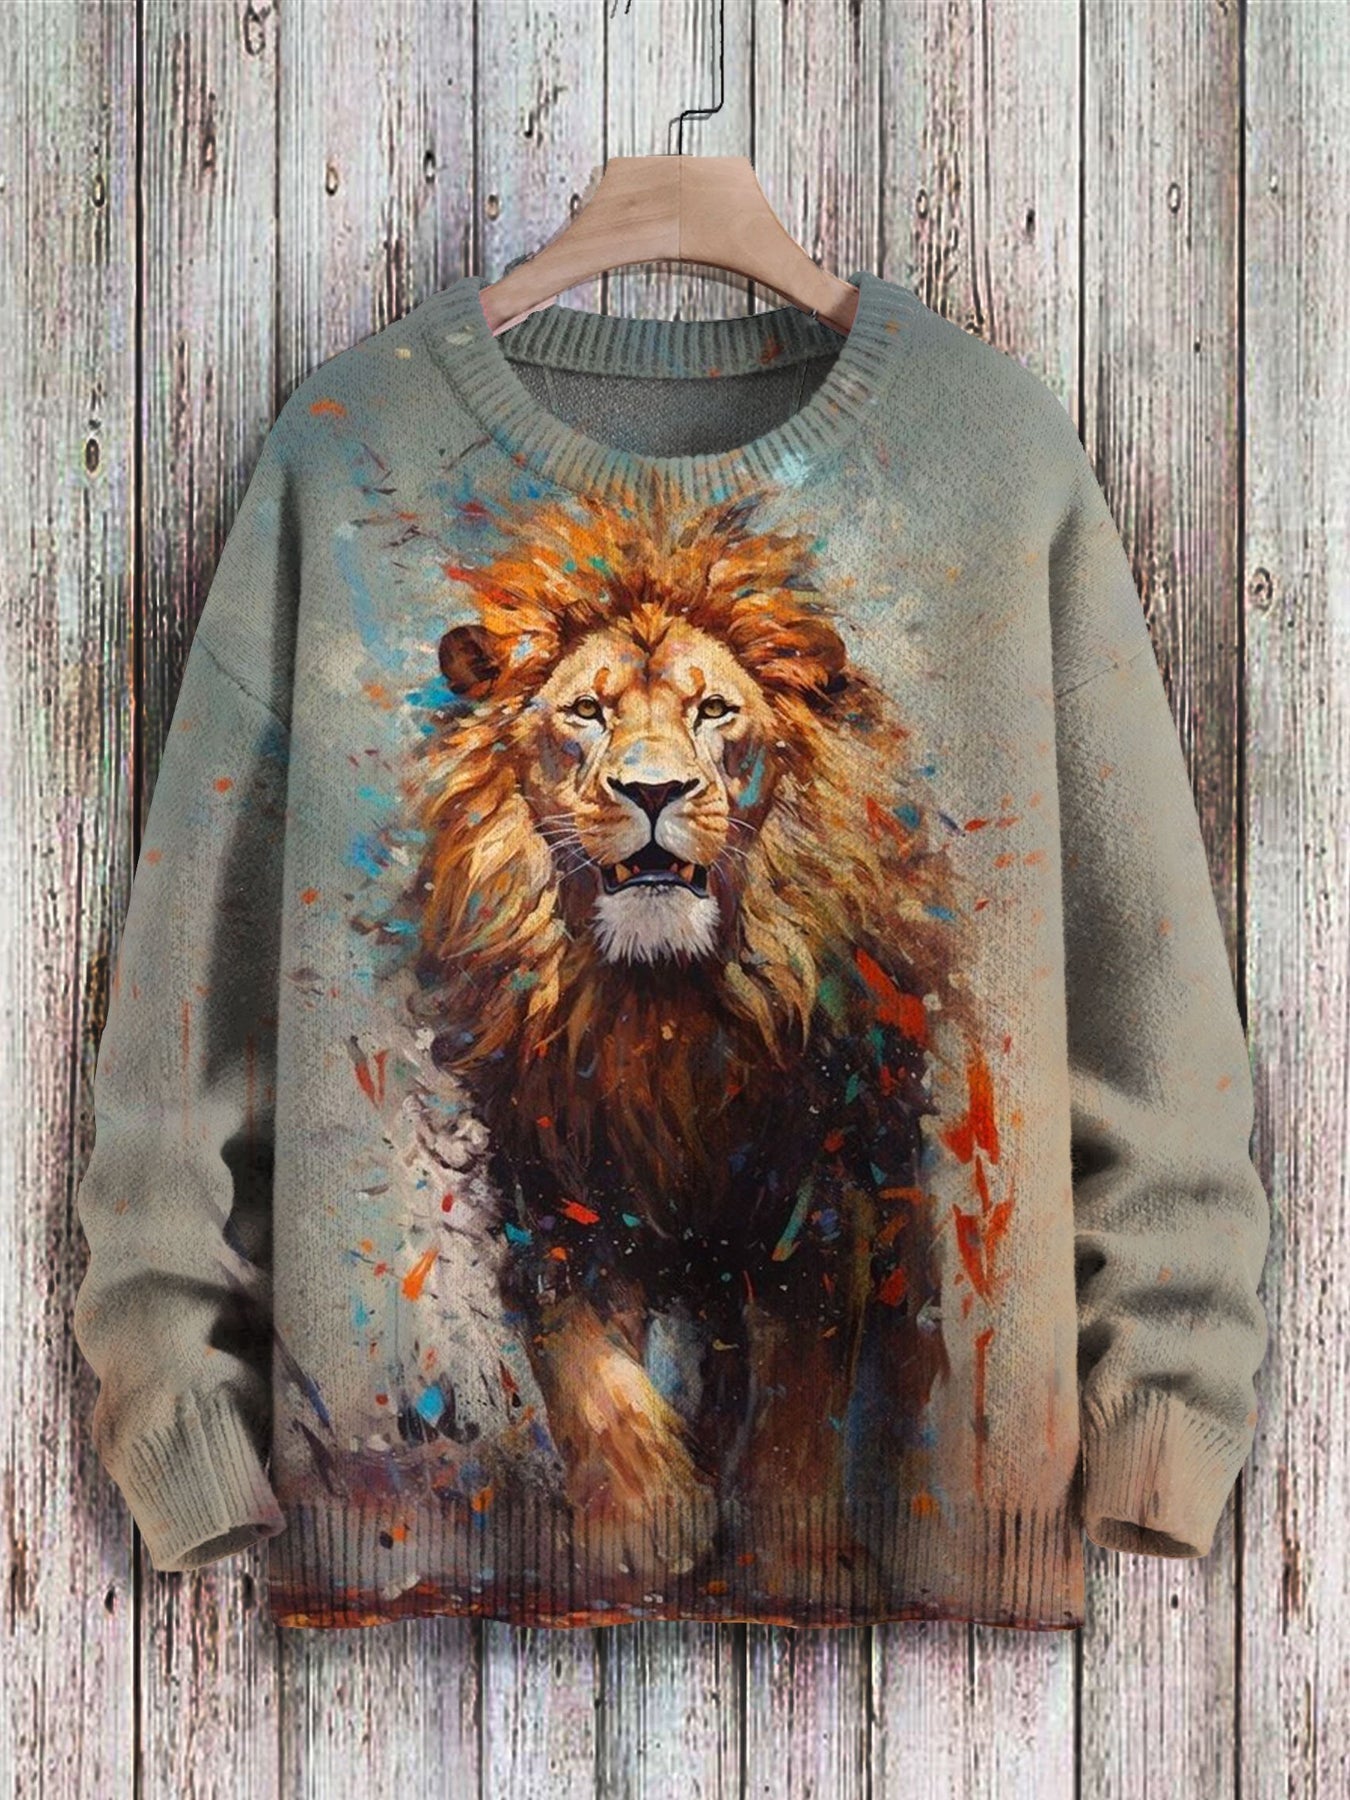 Lion Art Print Knit Pullover Sweater